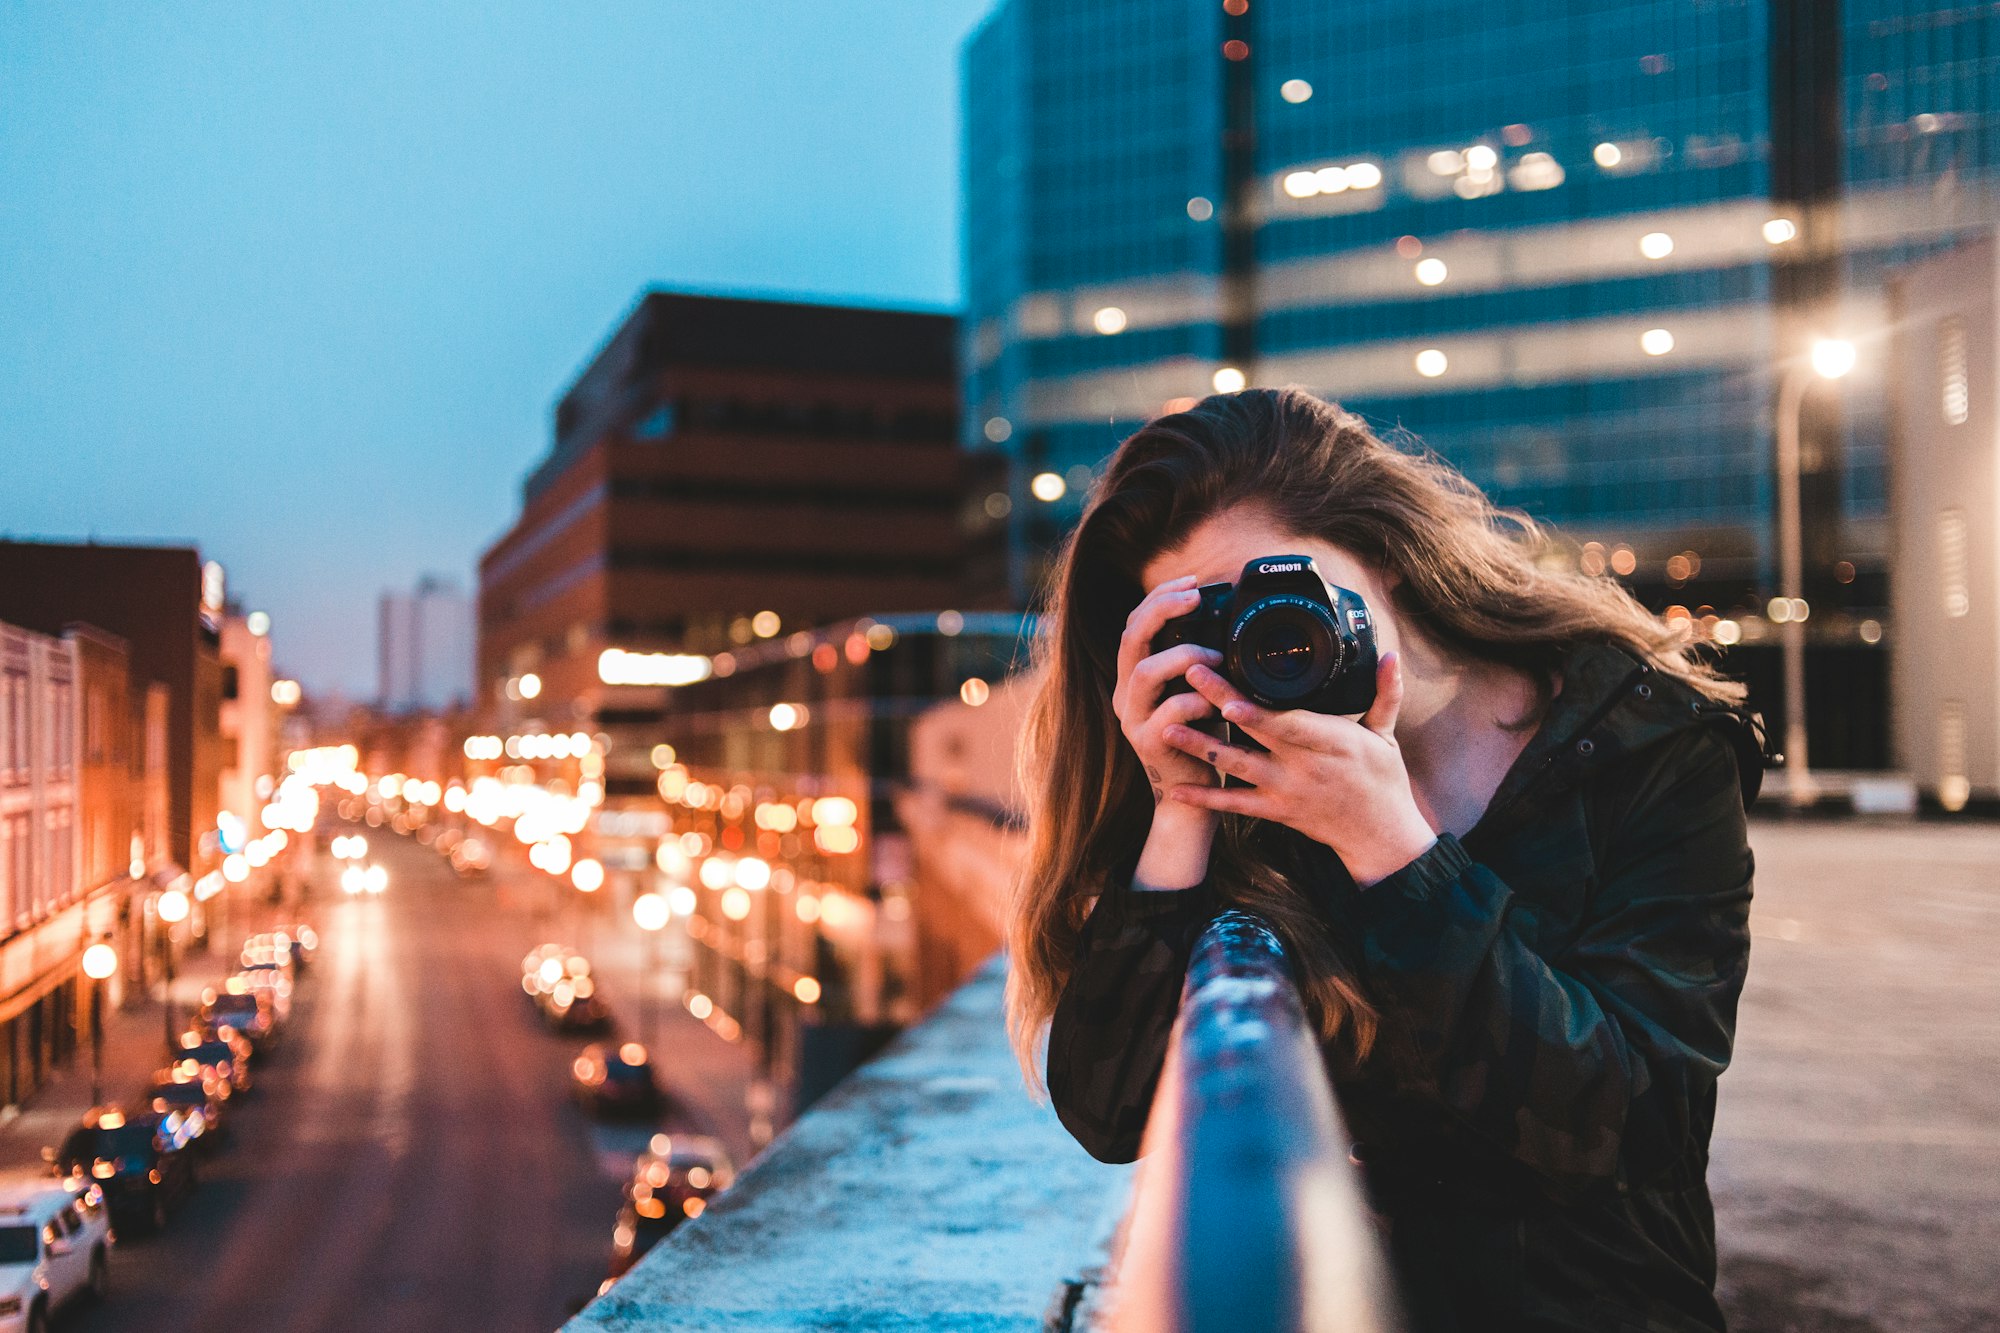 The 6 Best Photography Schools You Need to Know in London (2022 Update)